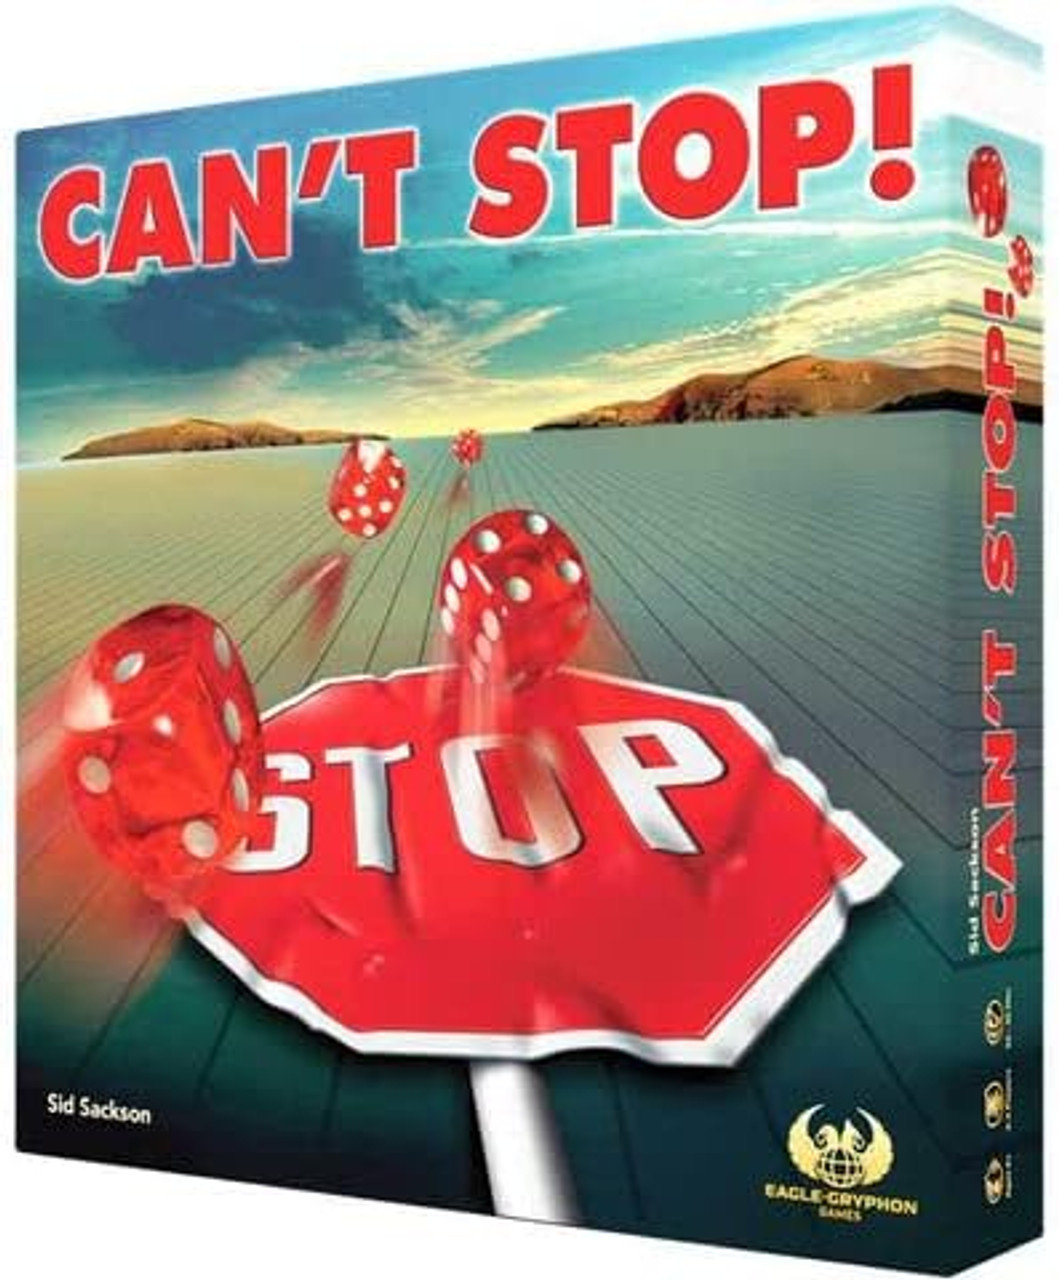 Can't Stop! Revised Edition